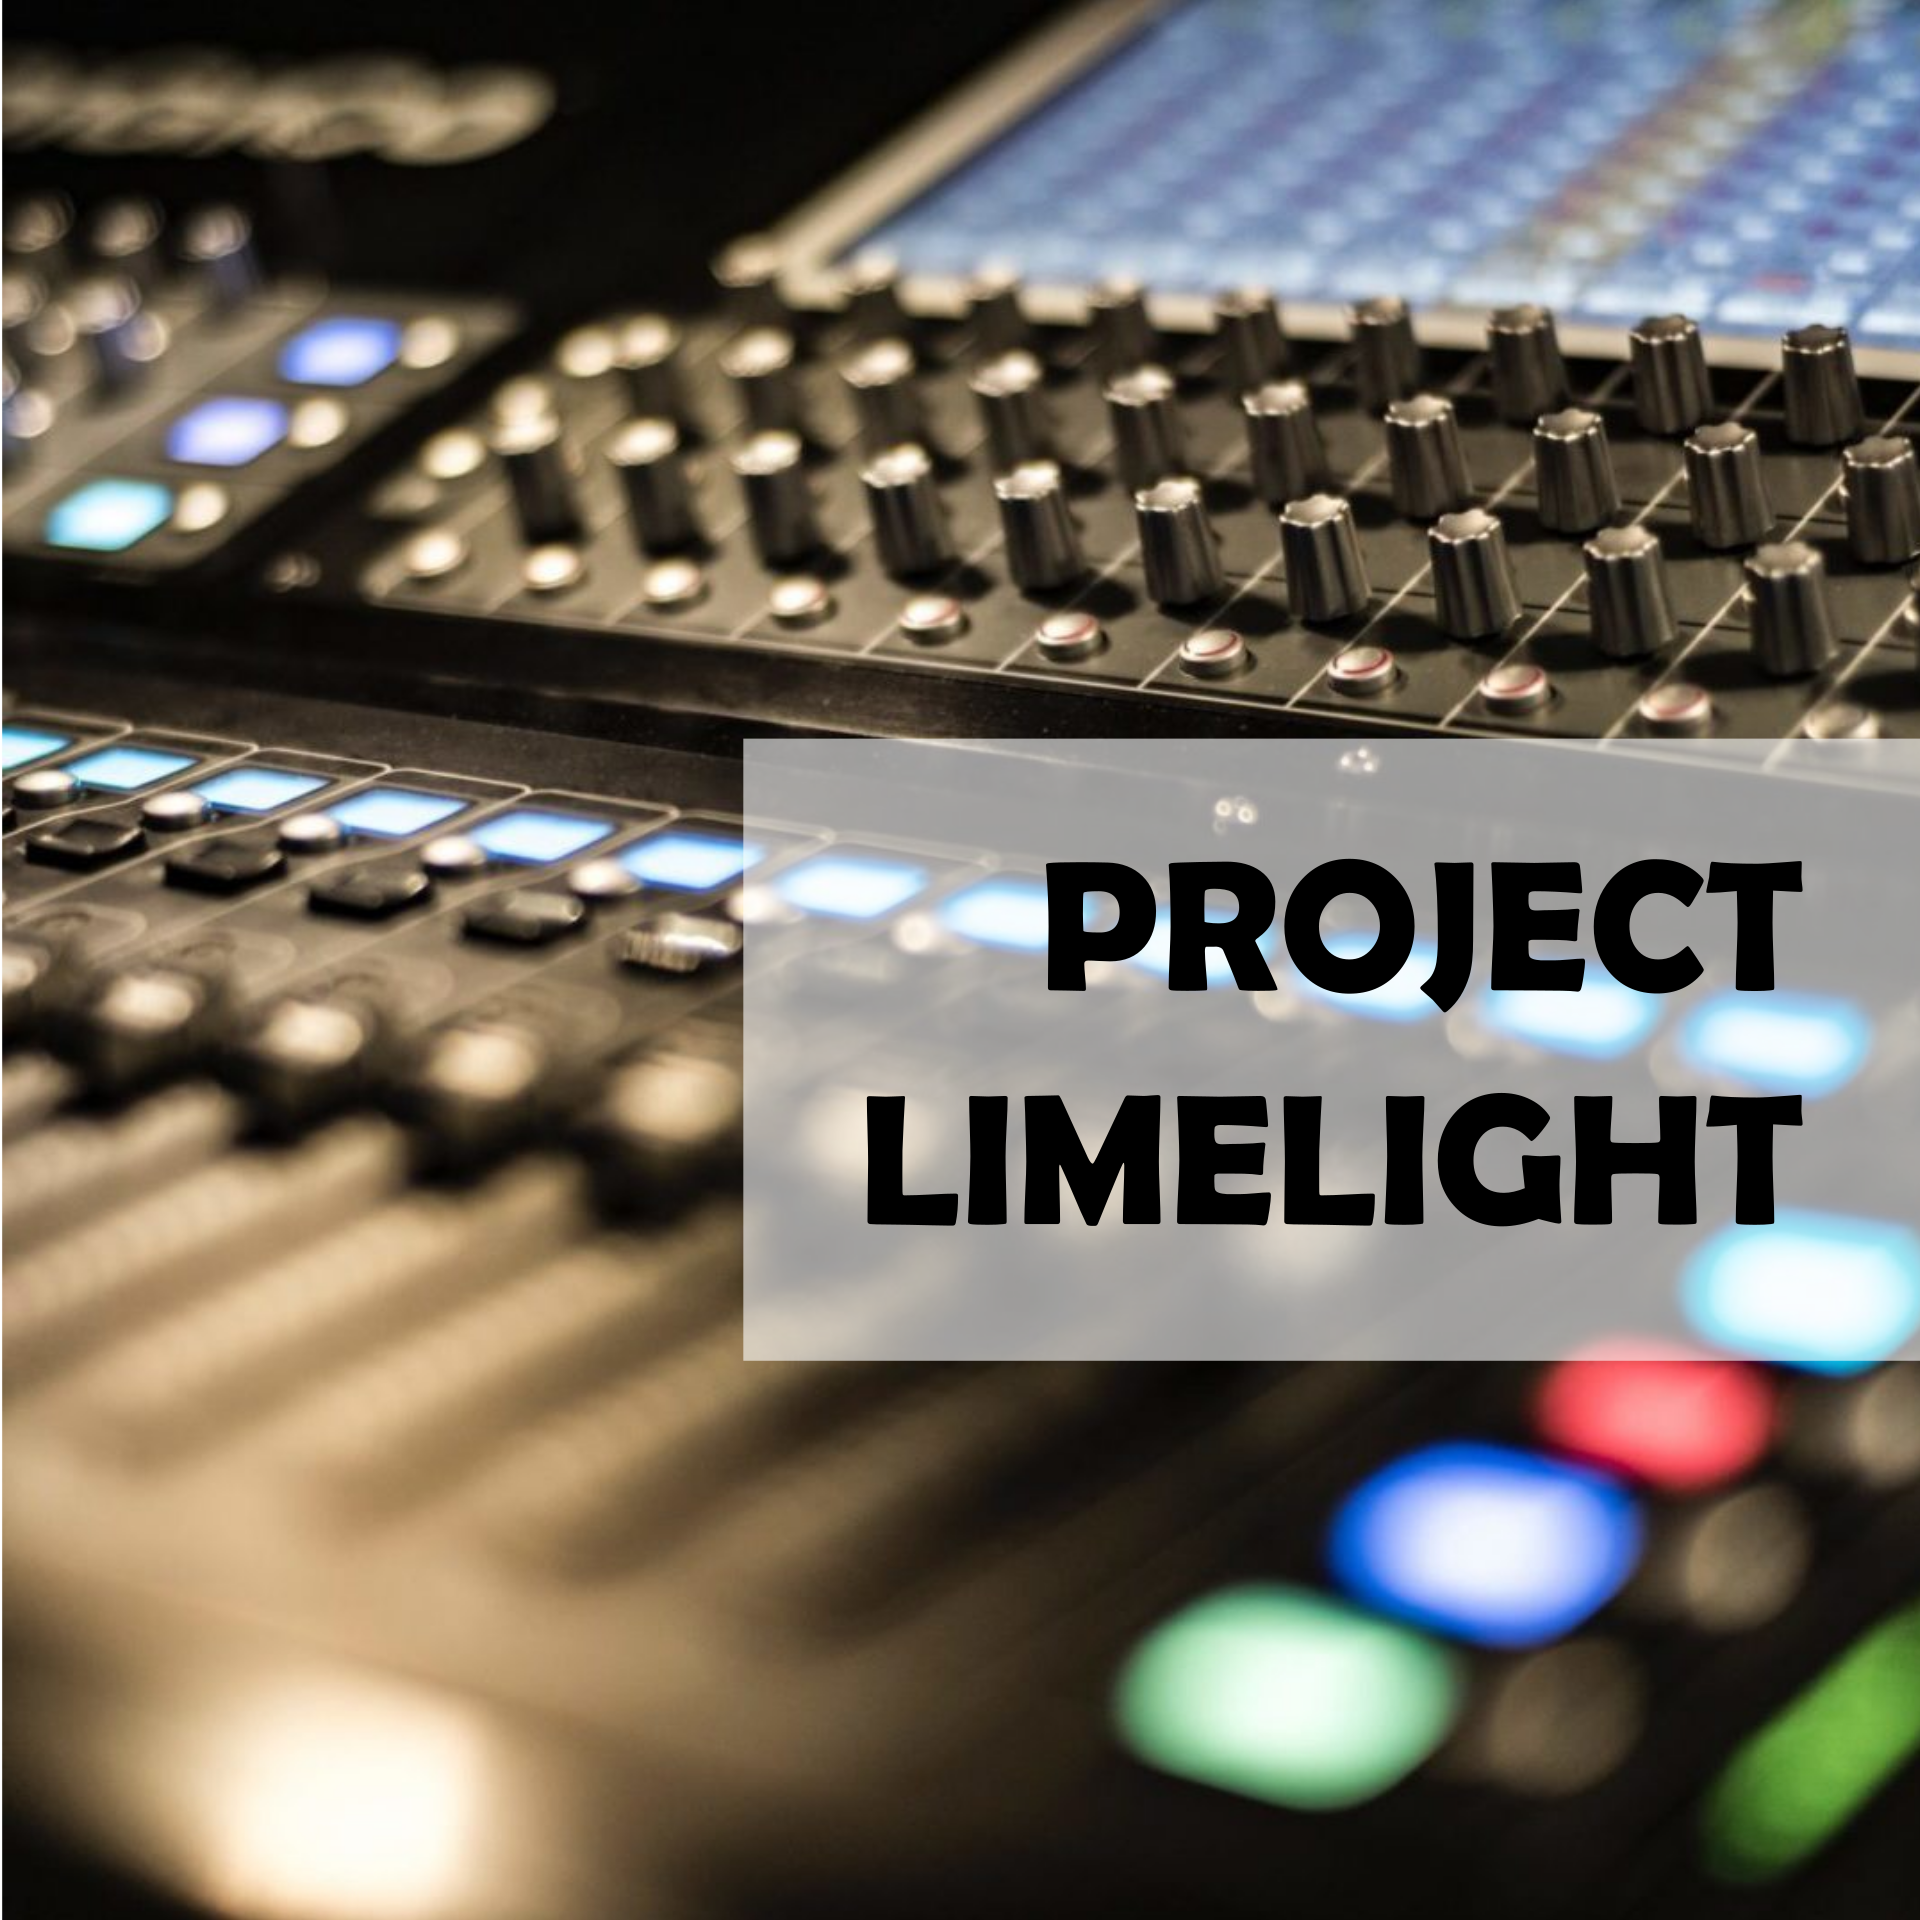 PROJECT LIMELIGHT